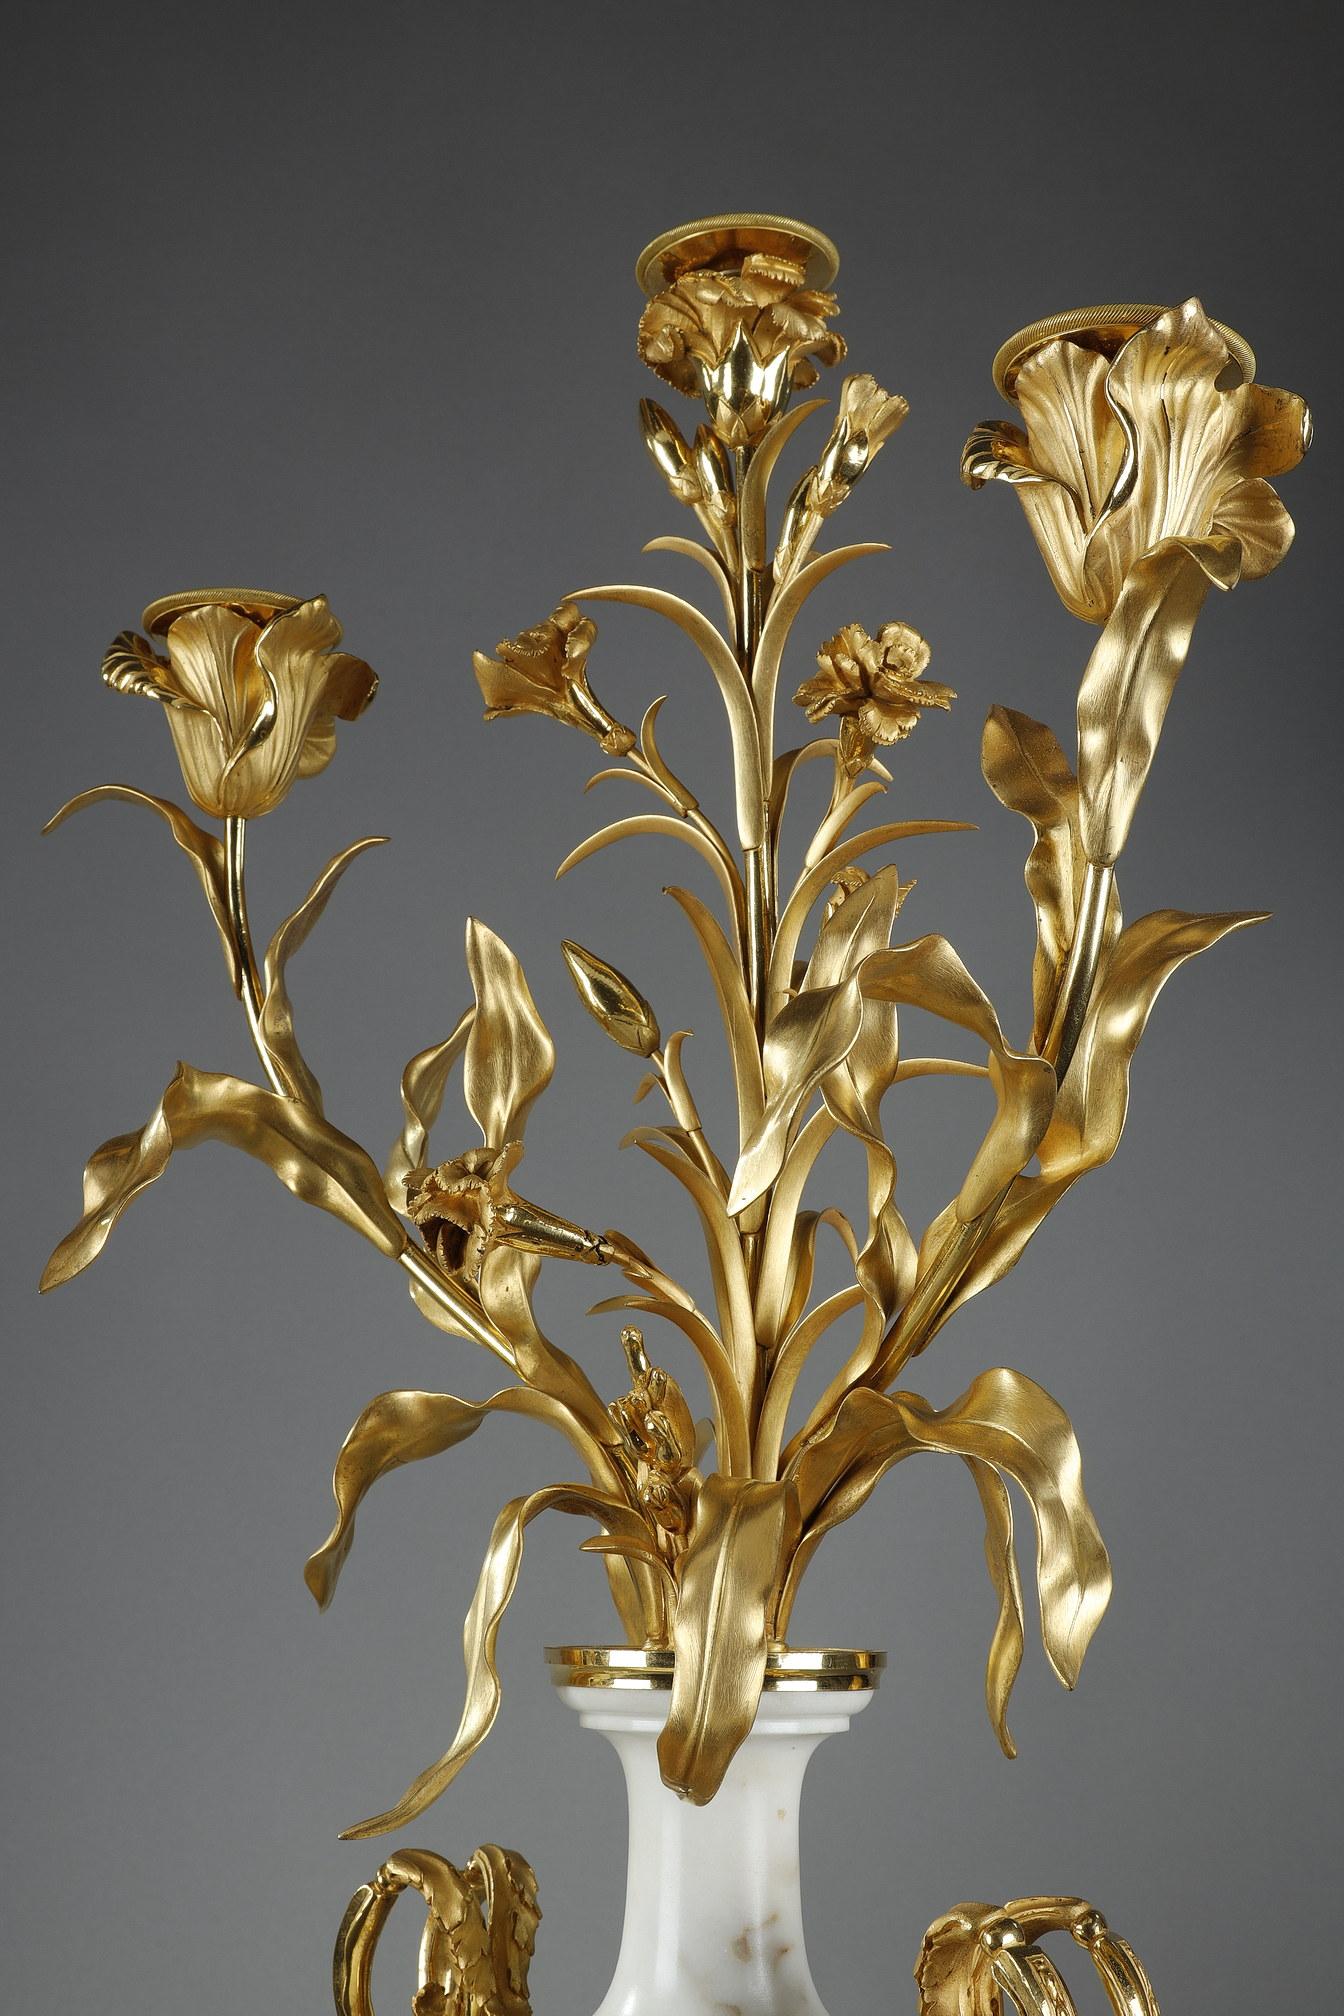 Pair of candelabras in bronze and gilded and Marblewhite with three arms of lights in the form of a bouquet of flowers. The shaft in the shape of vase is decorated with two handles ending in acanthus leaves and a garland of vine branches on both